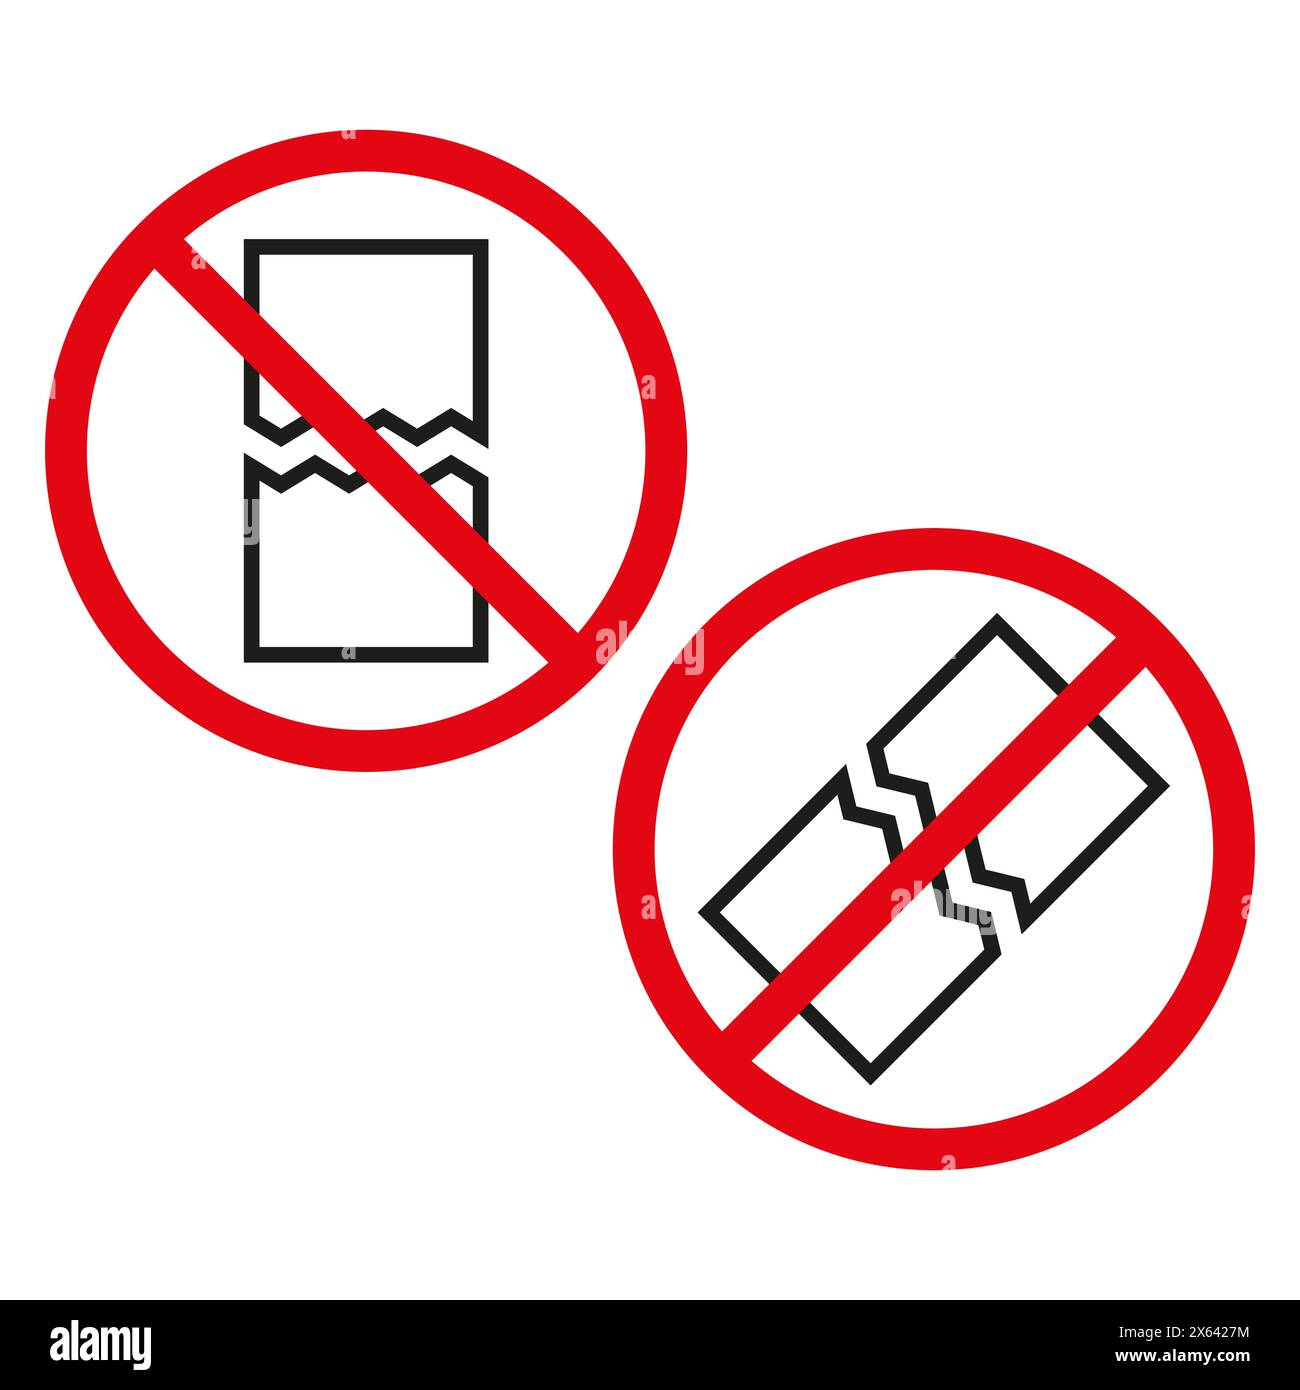 No broken objects Vector sign. Fragile item prohibition. Red circle with line. Handle with care instruction. Stock Vector